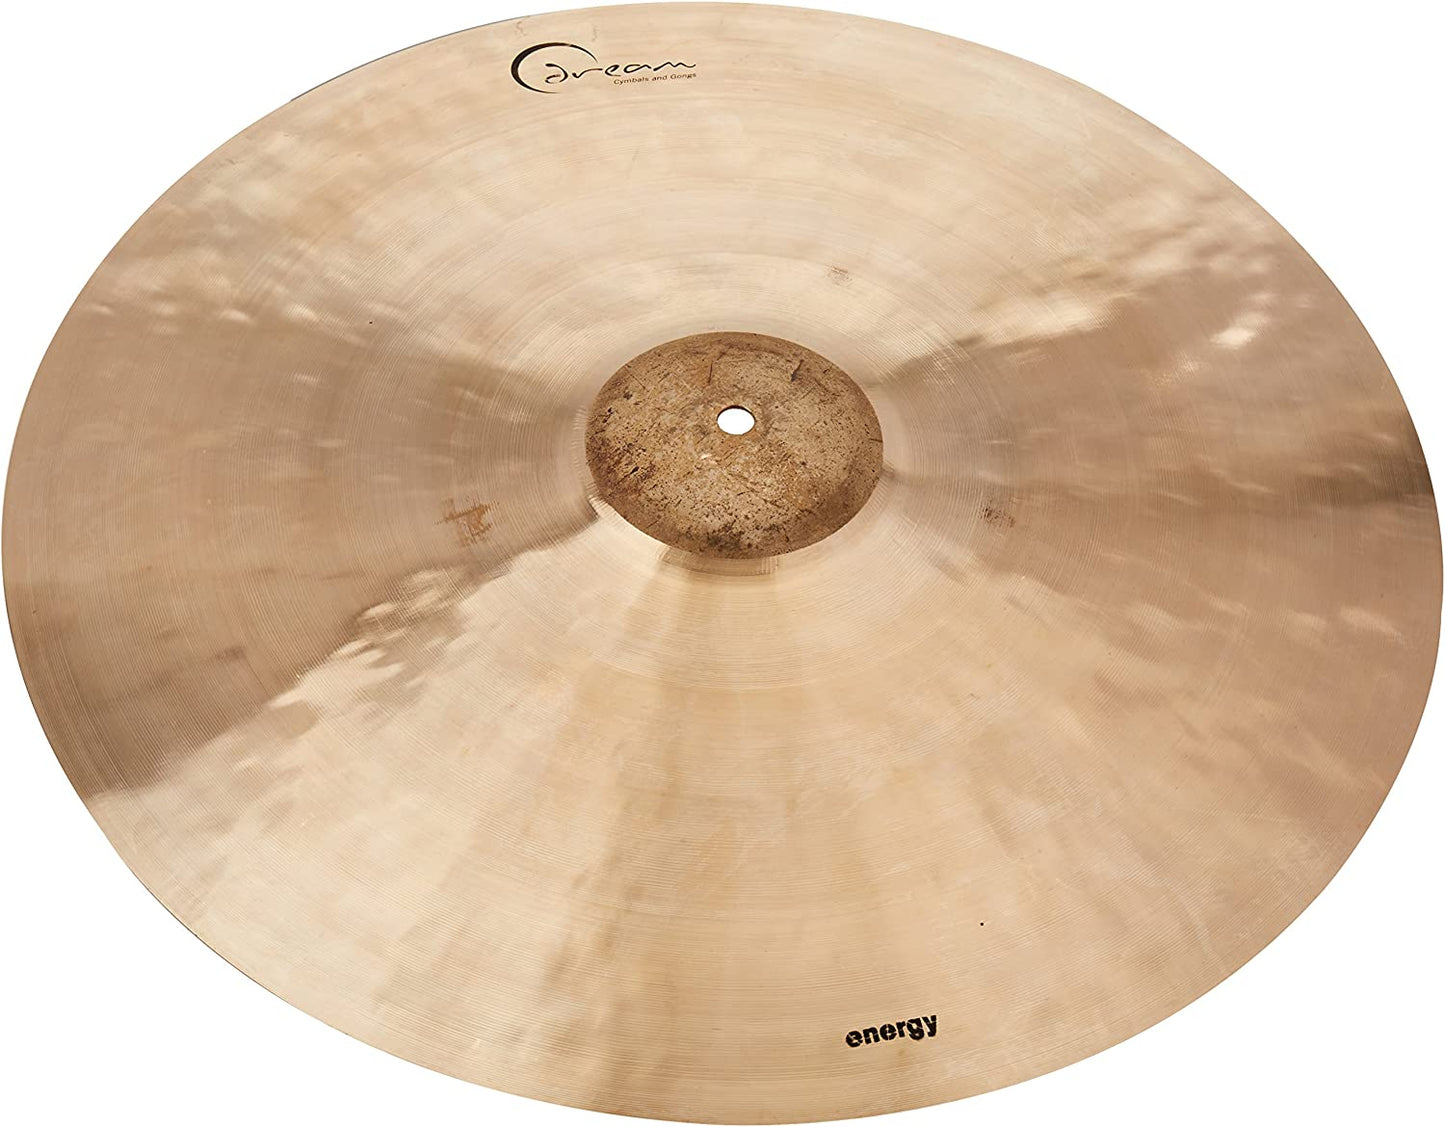 Dream Cymbals 20” Energy Ride Cymbal